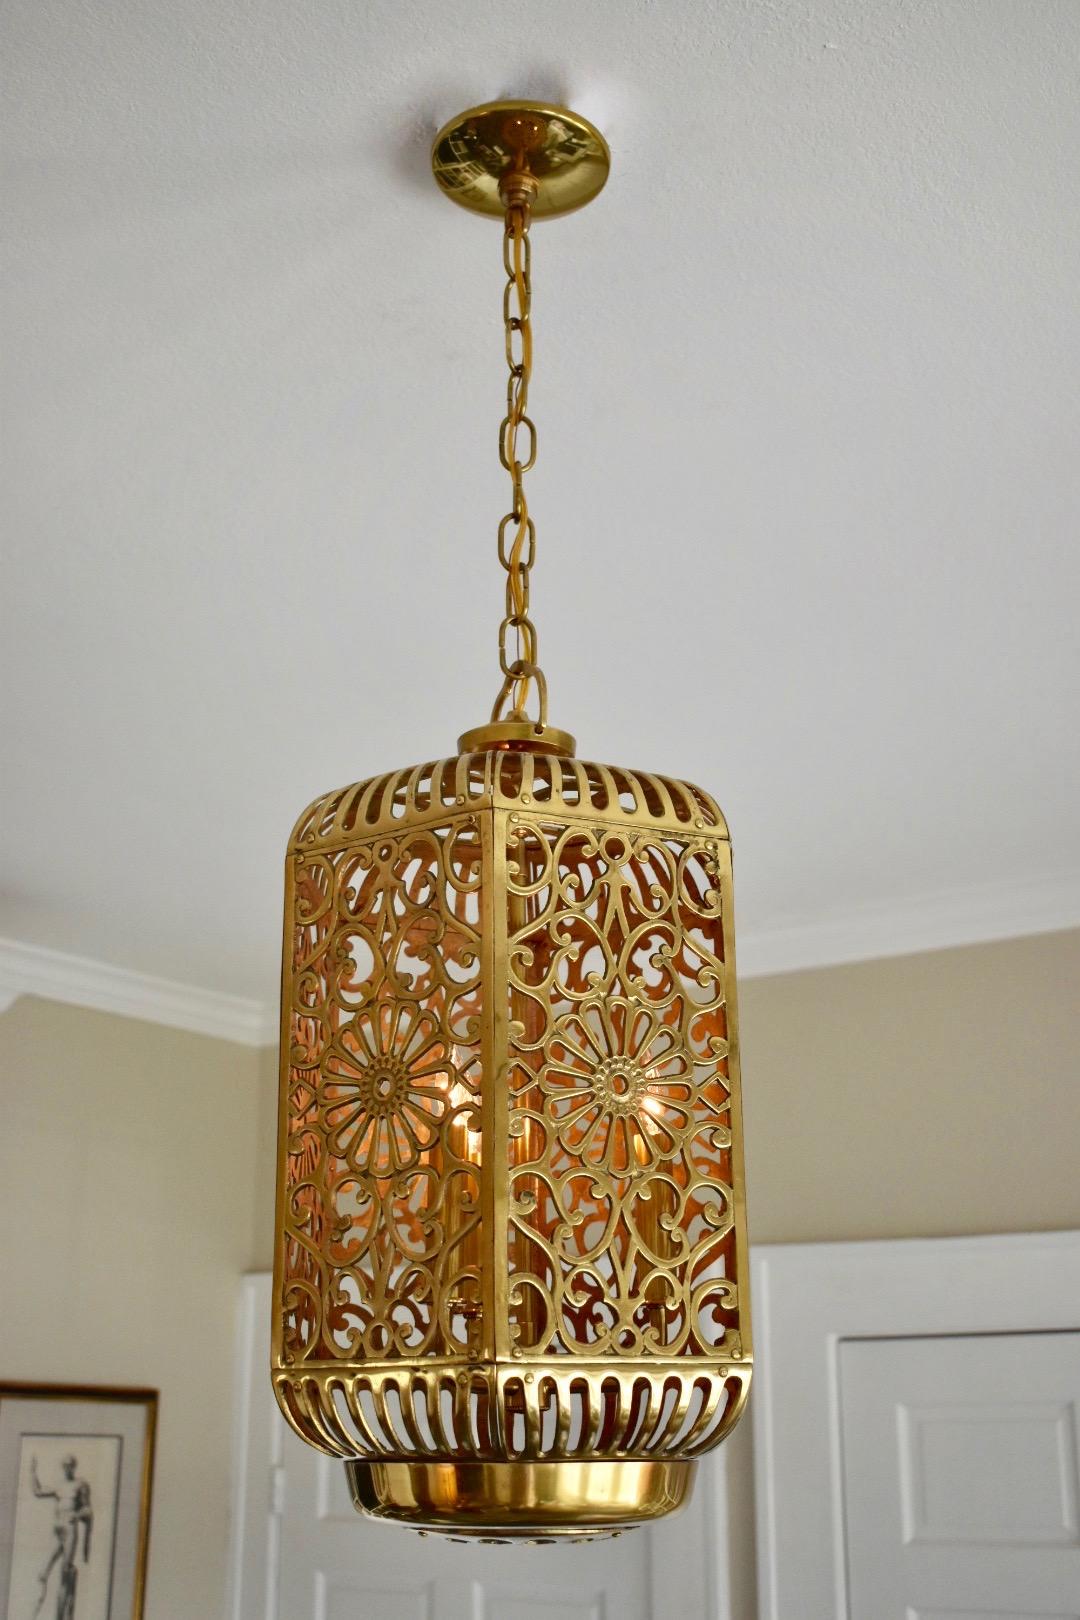 A large and high quality brass ceiling or pendant light with karakusa scrolling arabesque patterns and Imperial chrysanthemum motif. Handcrafted from thick solid brass in Japan in the 1950s, this pendant has been refitted with a custom brass triple